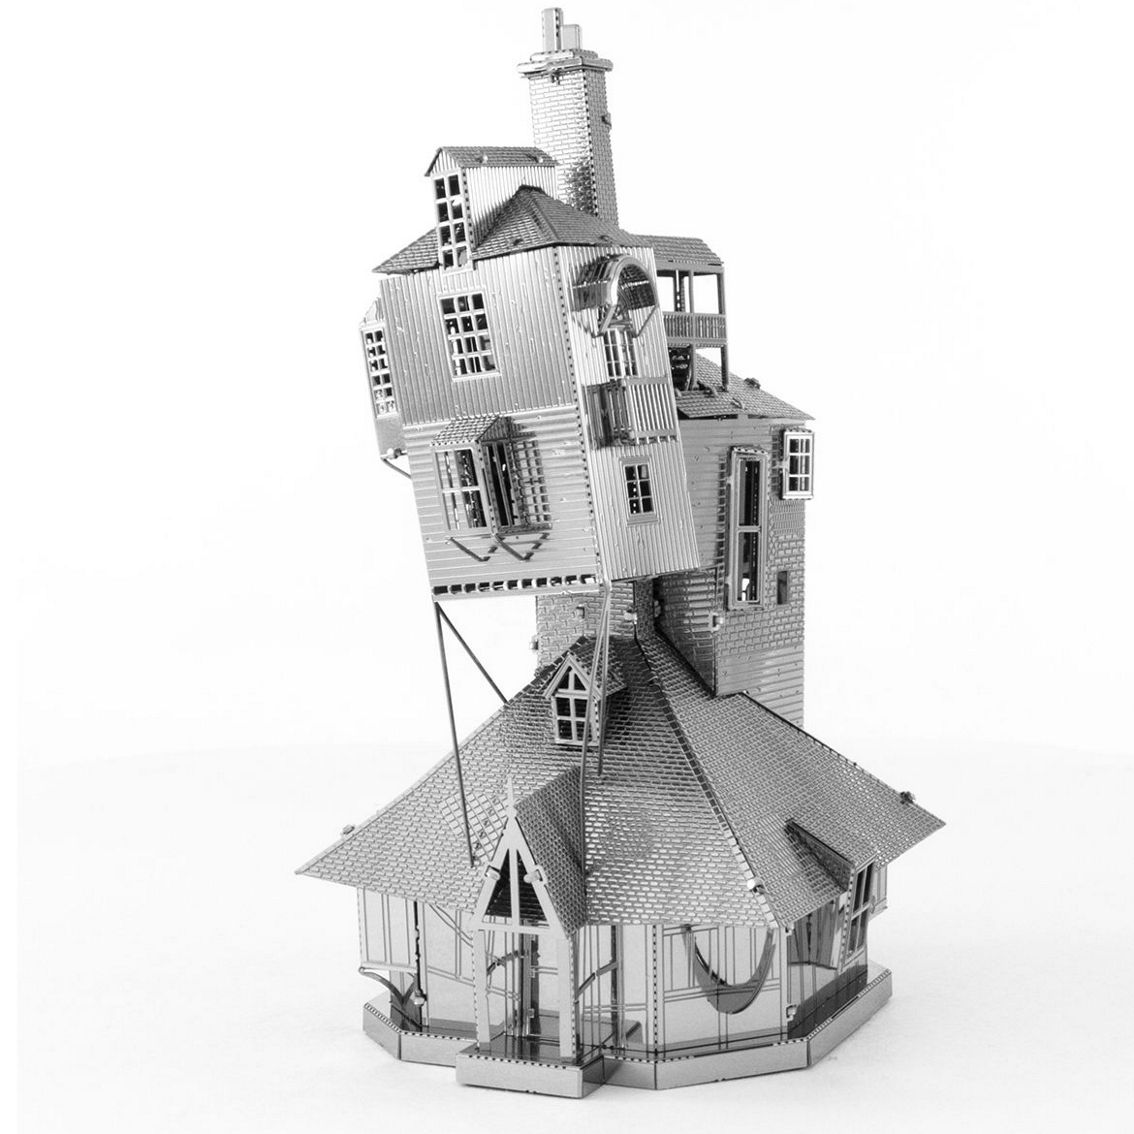 Fascinations Metal Earth 3D Model Kit - Harry Potter The Burrow Weasley Family Home - Image 4 of 5